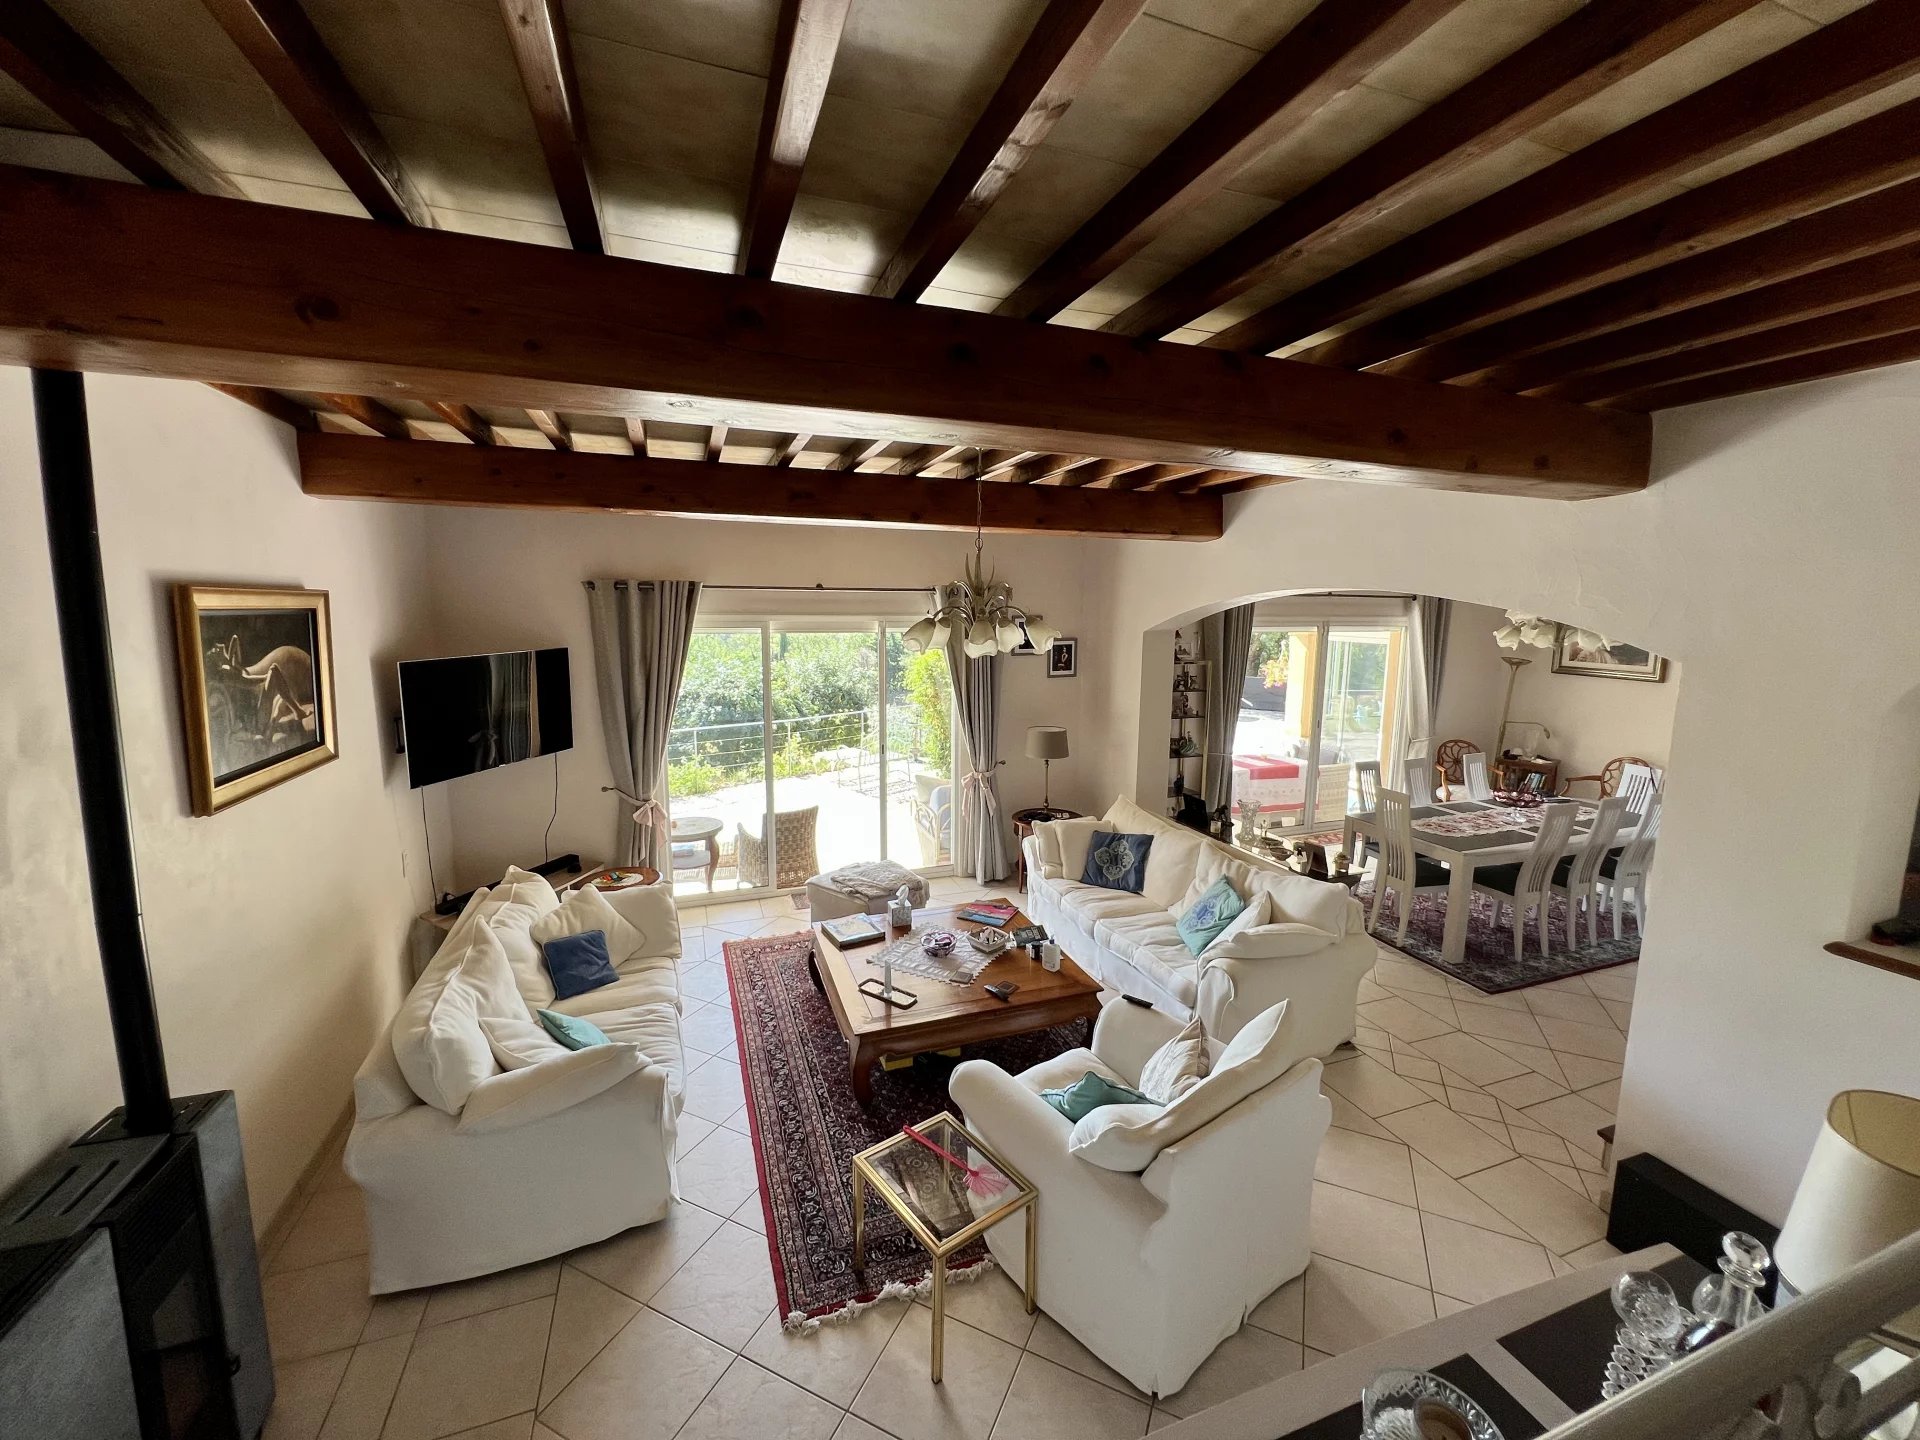 Walking distance from Cotignac in a quiet area